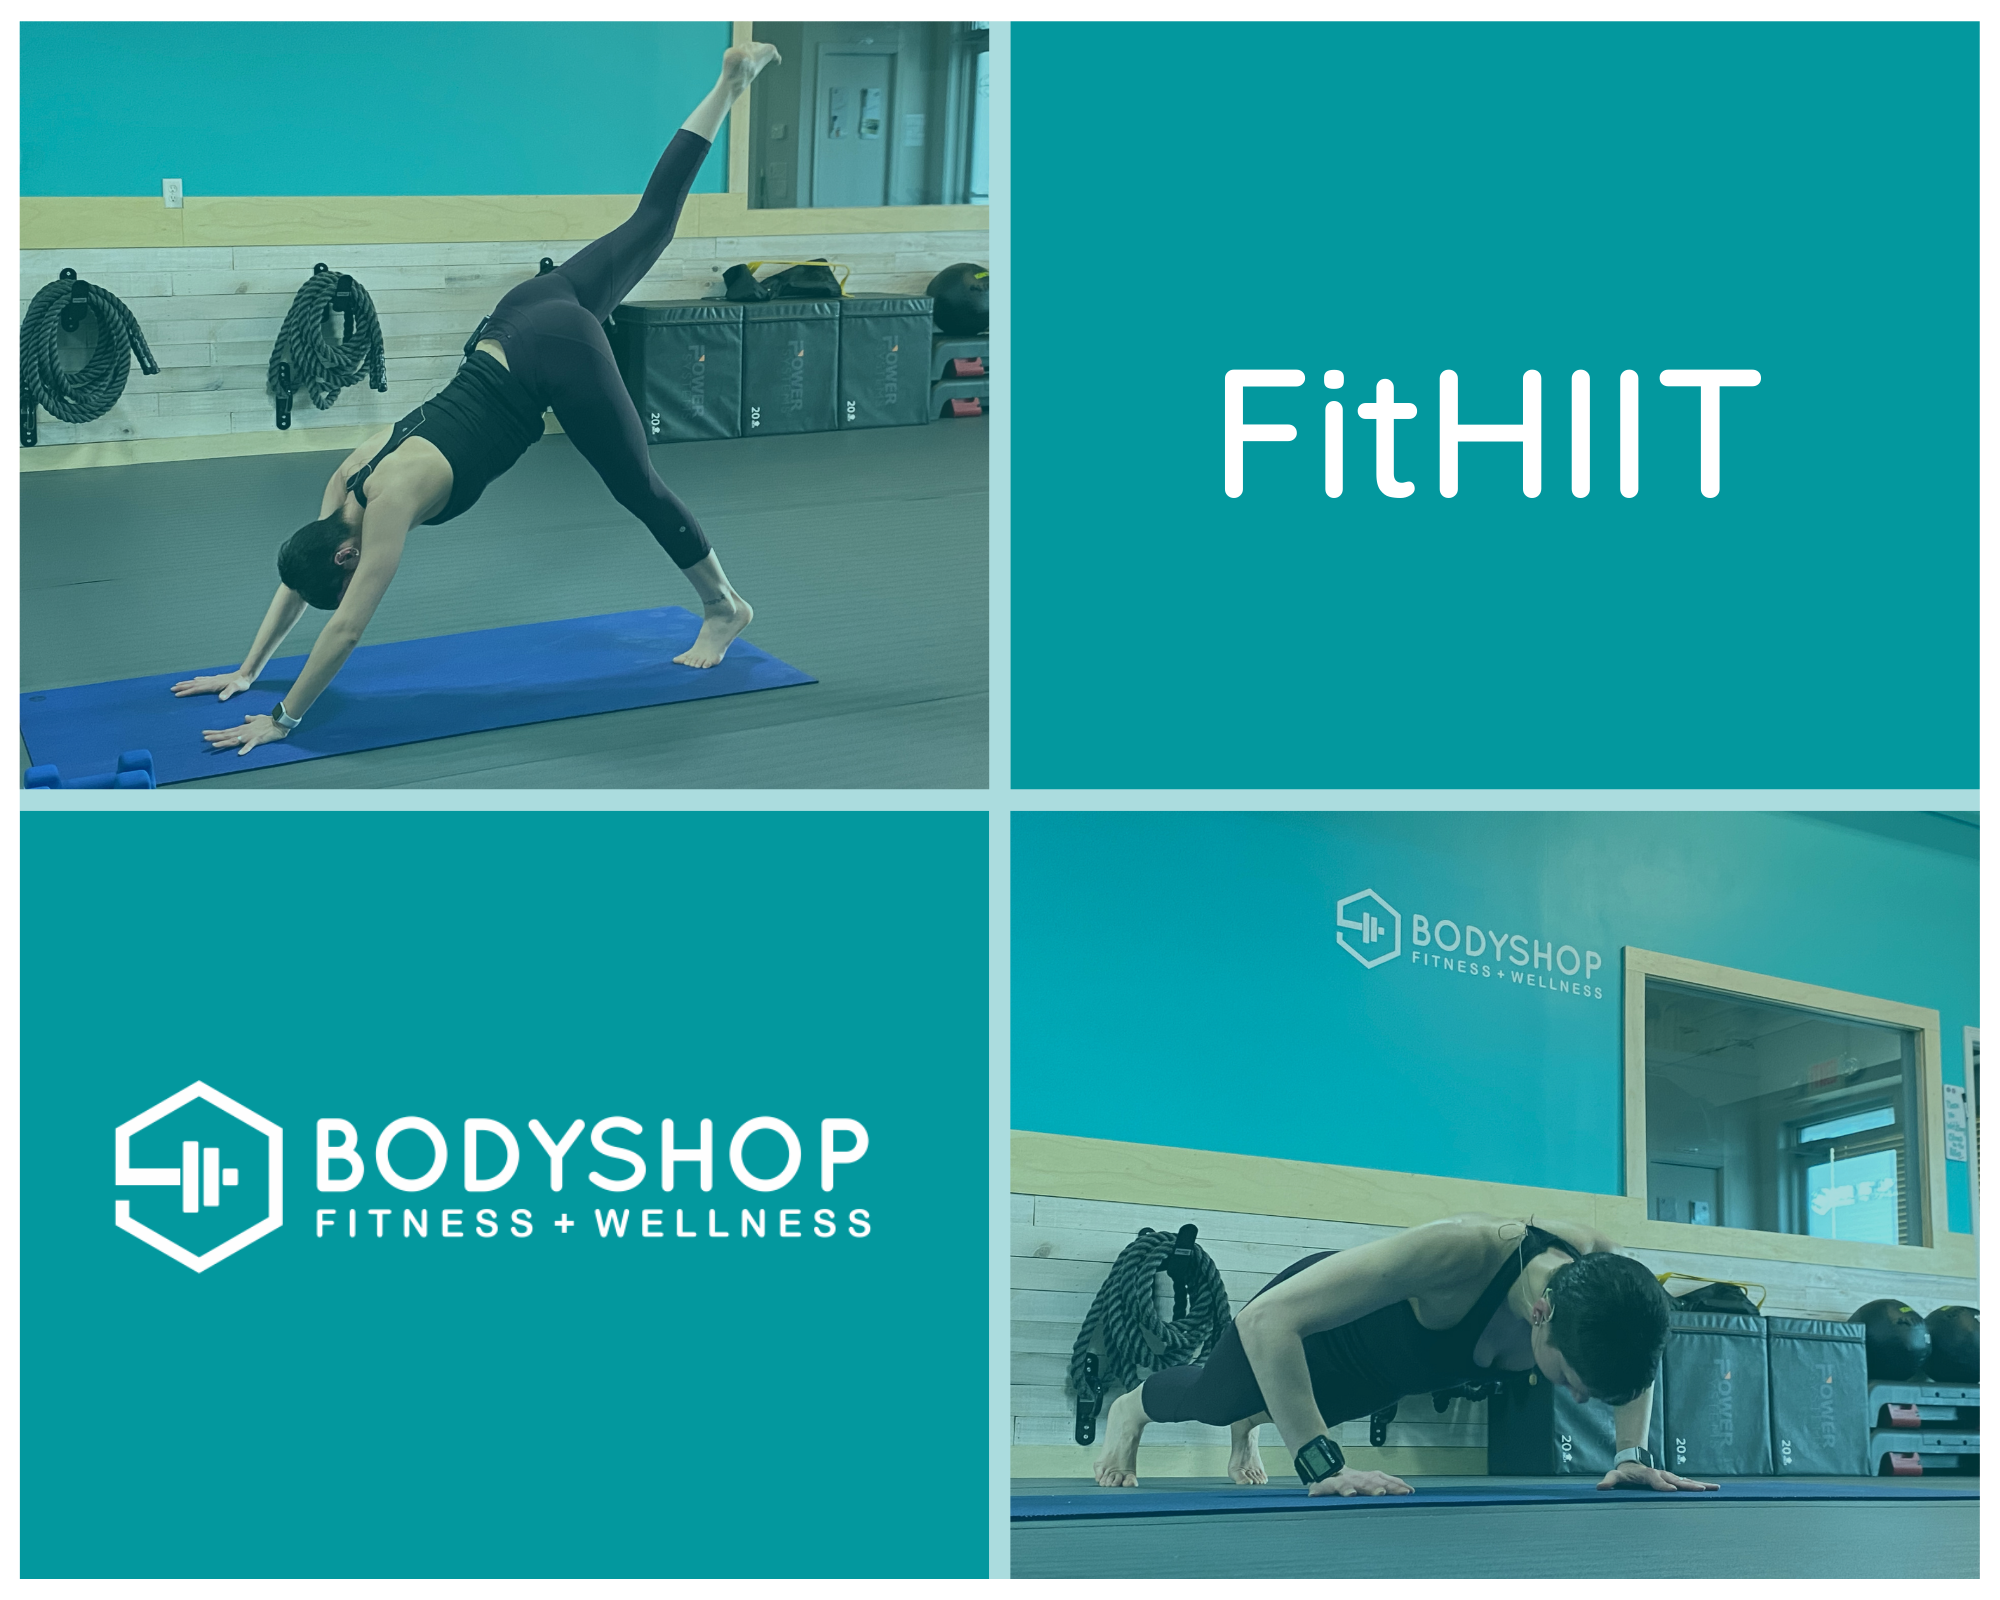 Fitness at the BodyShaper, Maynooth: Opening Hours, Price and Opinions